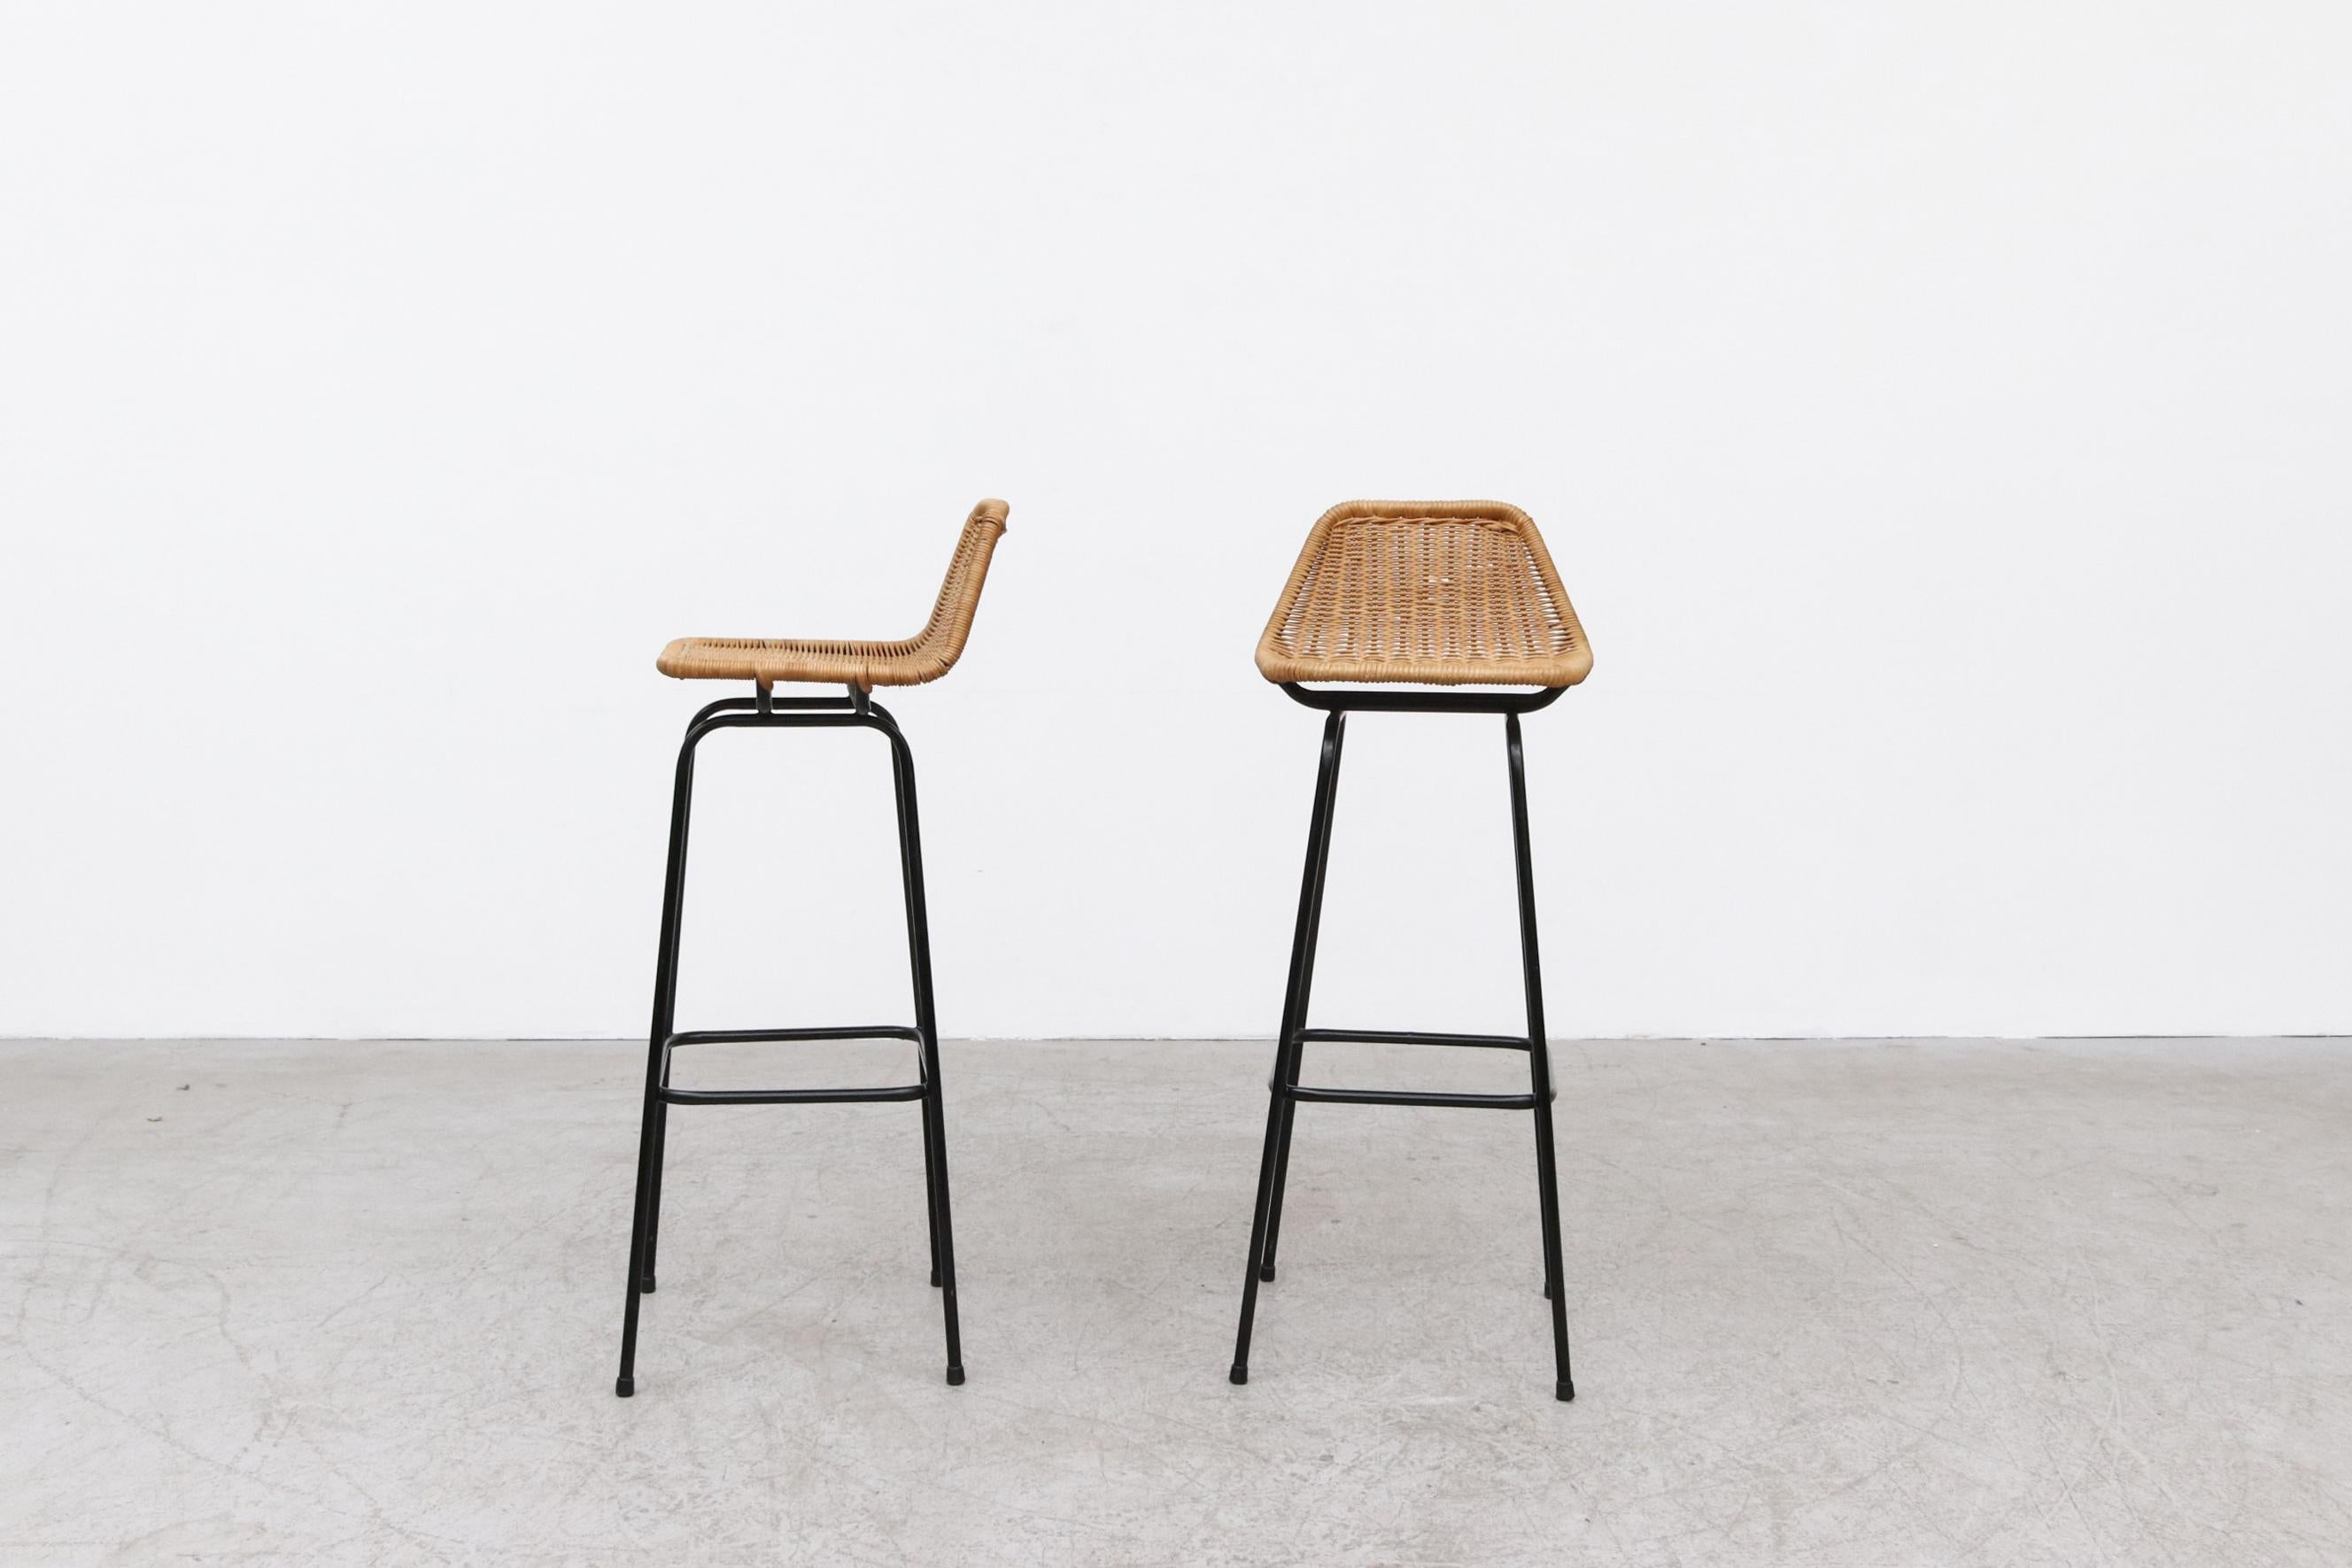 Charlotte Perriand Style Wicker bar stools with angled seat back and black legs. Seat height is 33